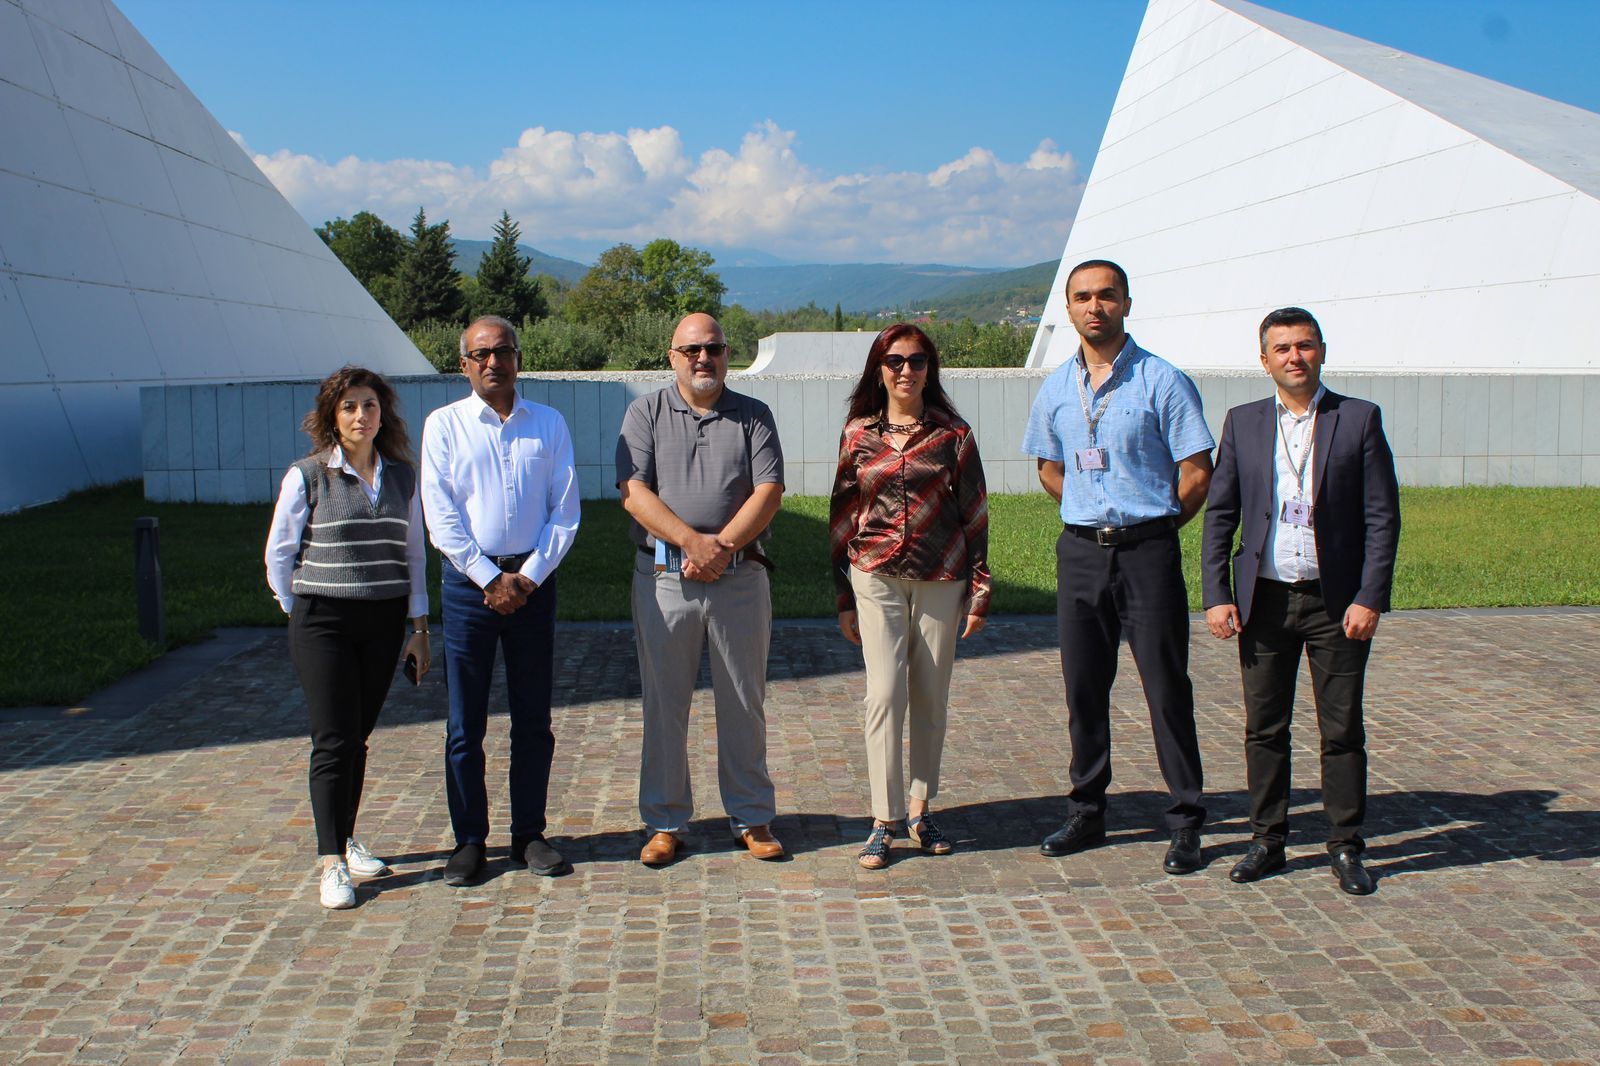 The Canadian parliamentarian visited the Guba Genocide Memorial Complex and Krasnaya Sloboda